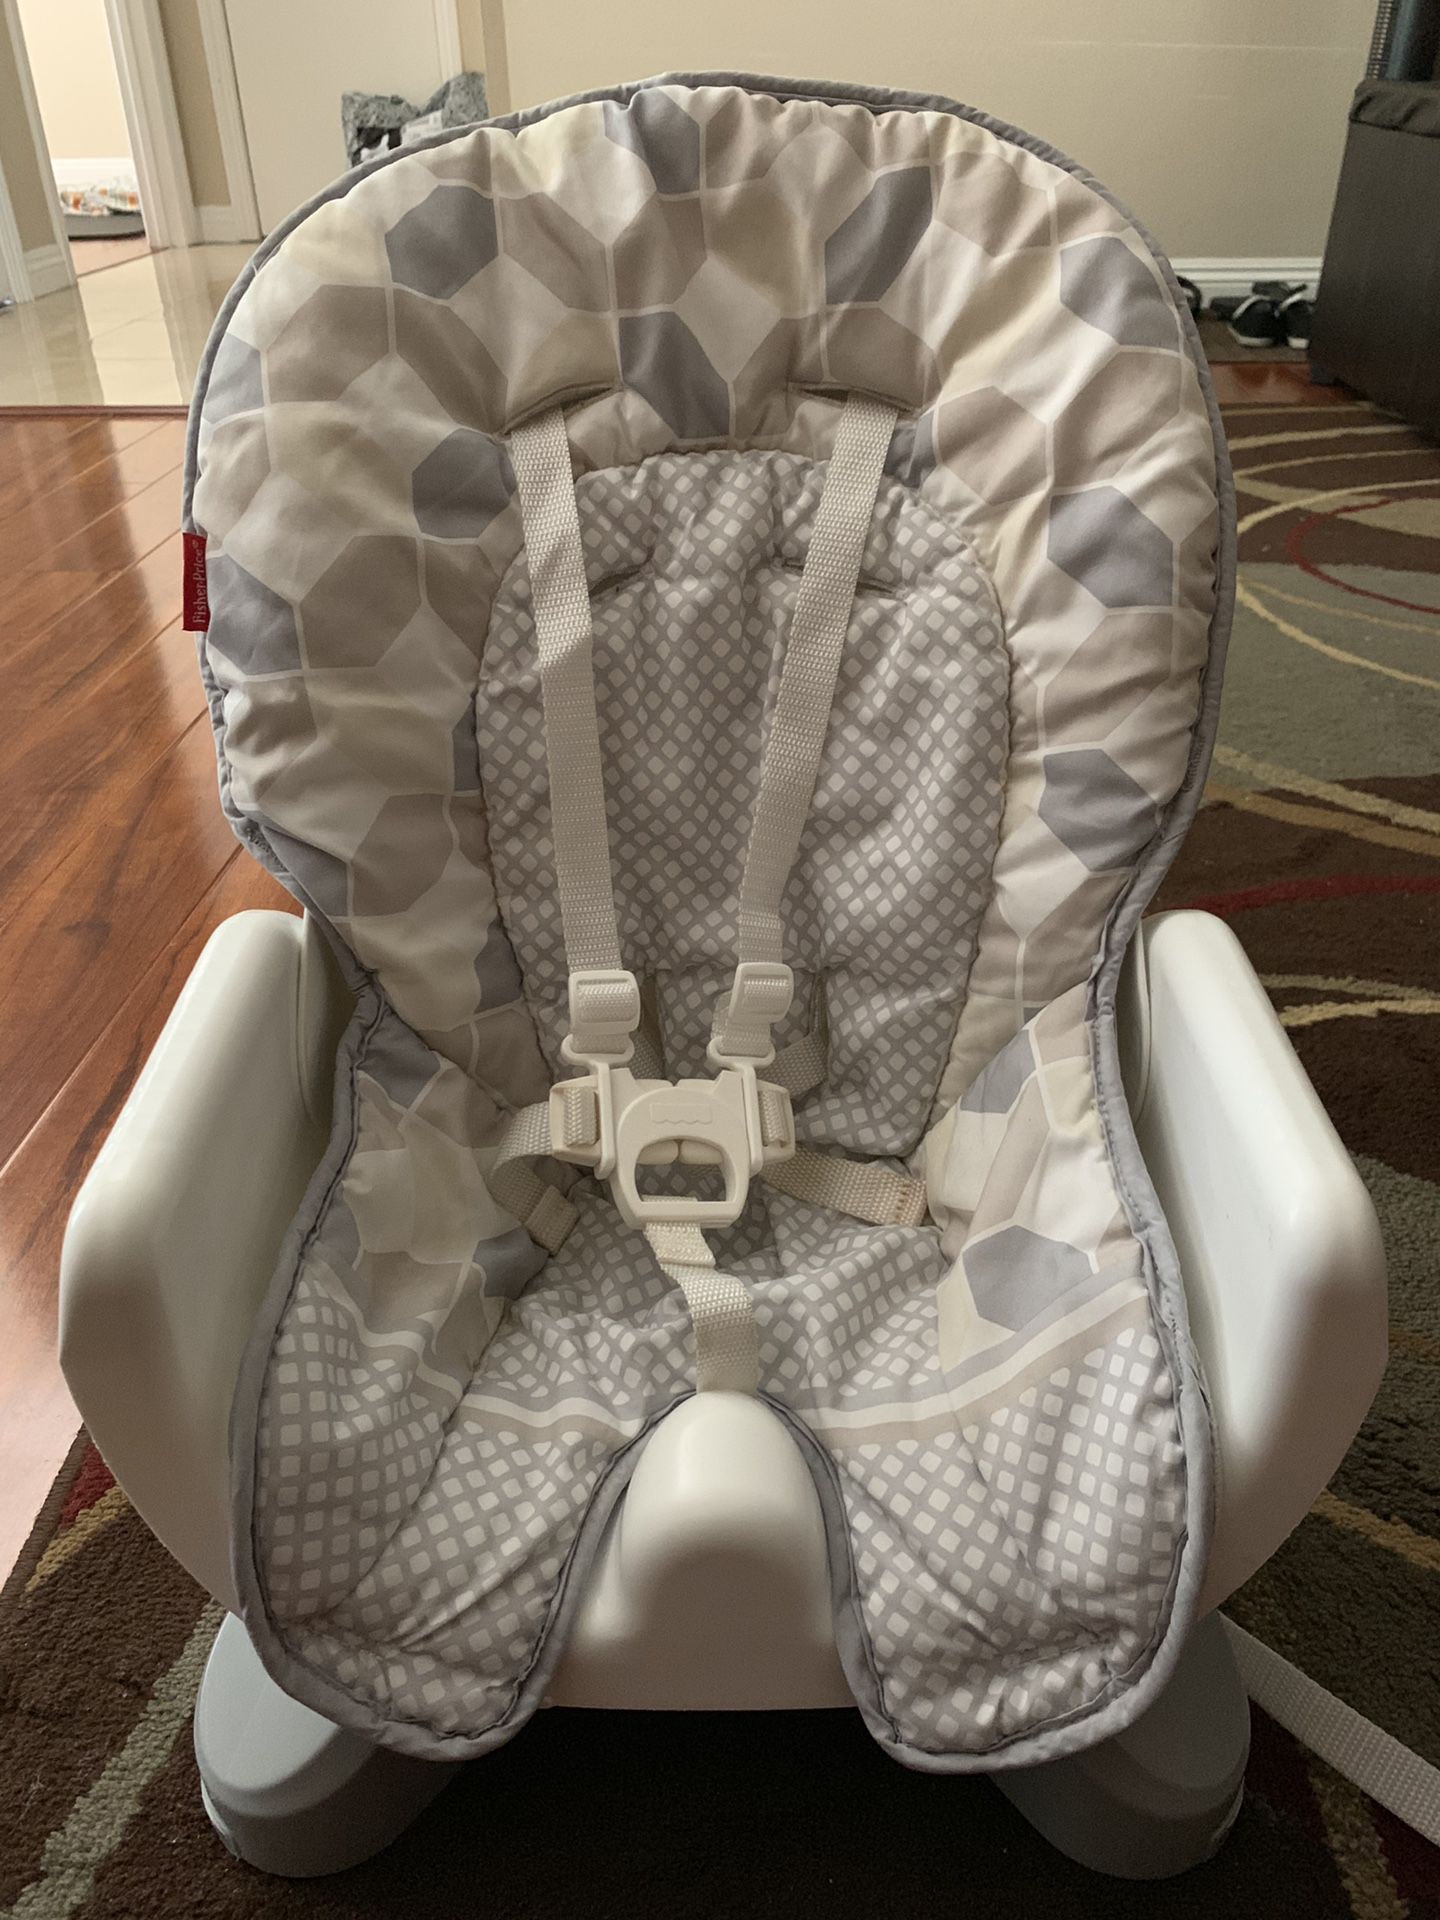 Baby High Chair/ Booster seat